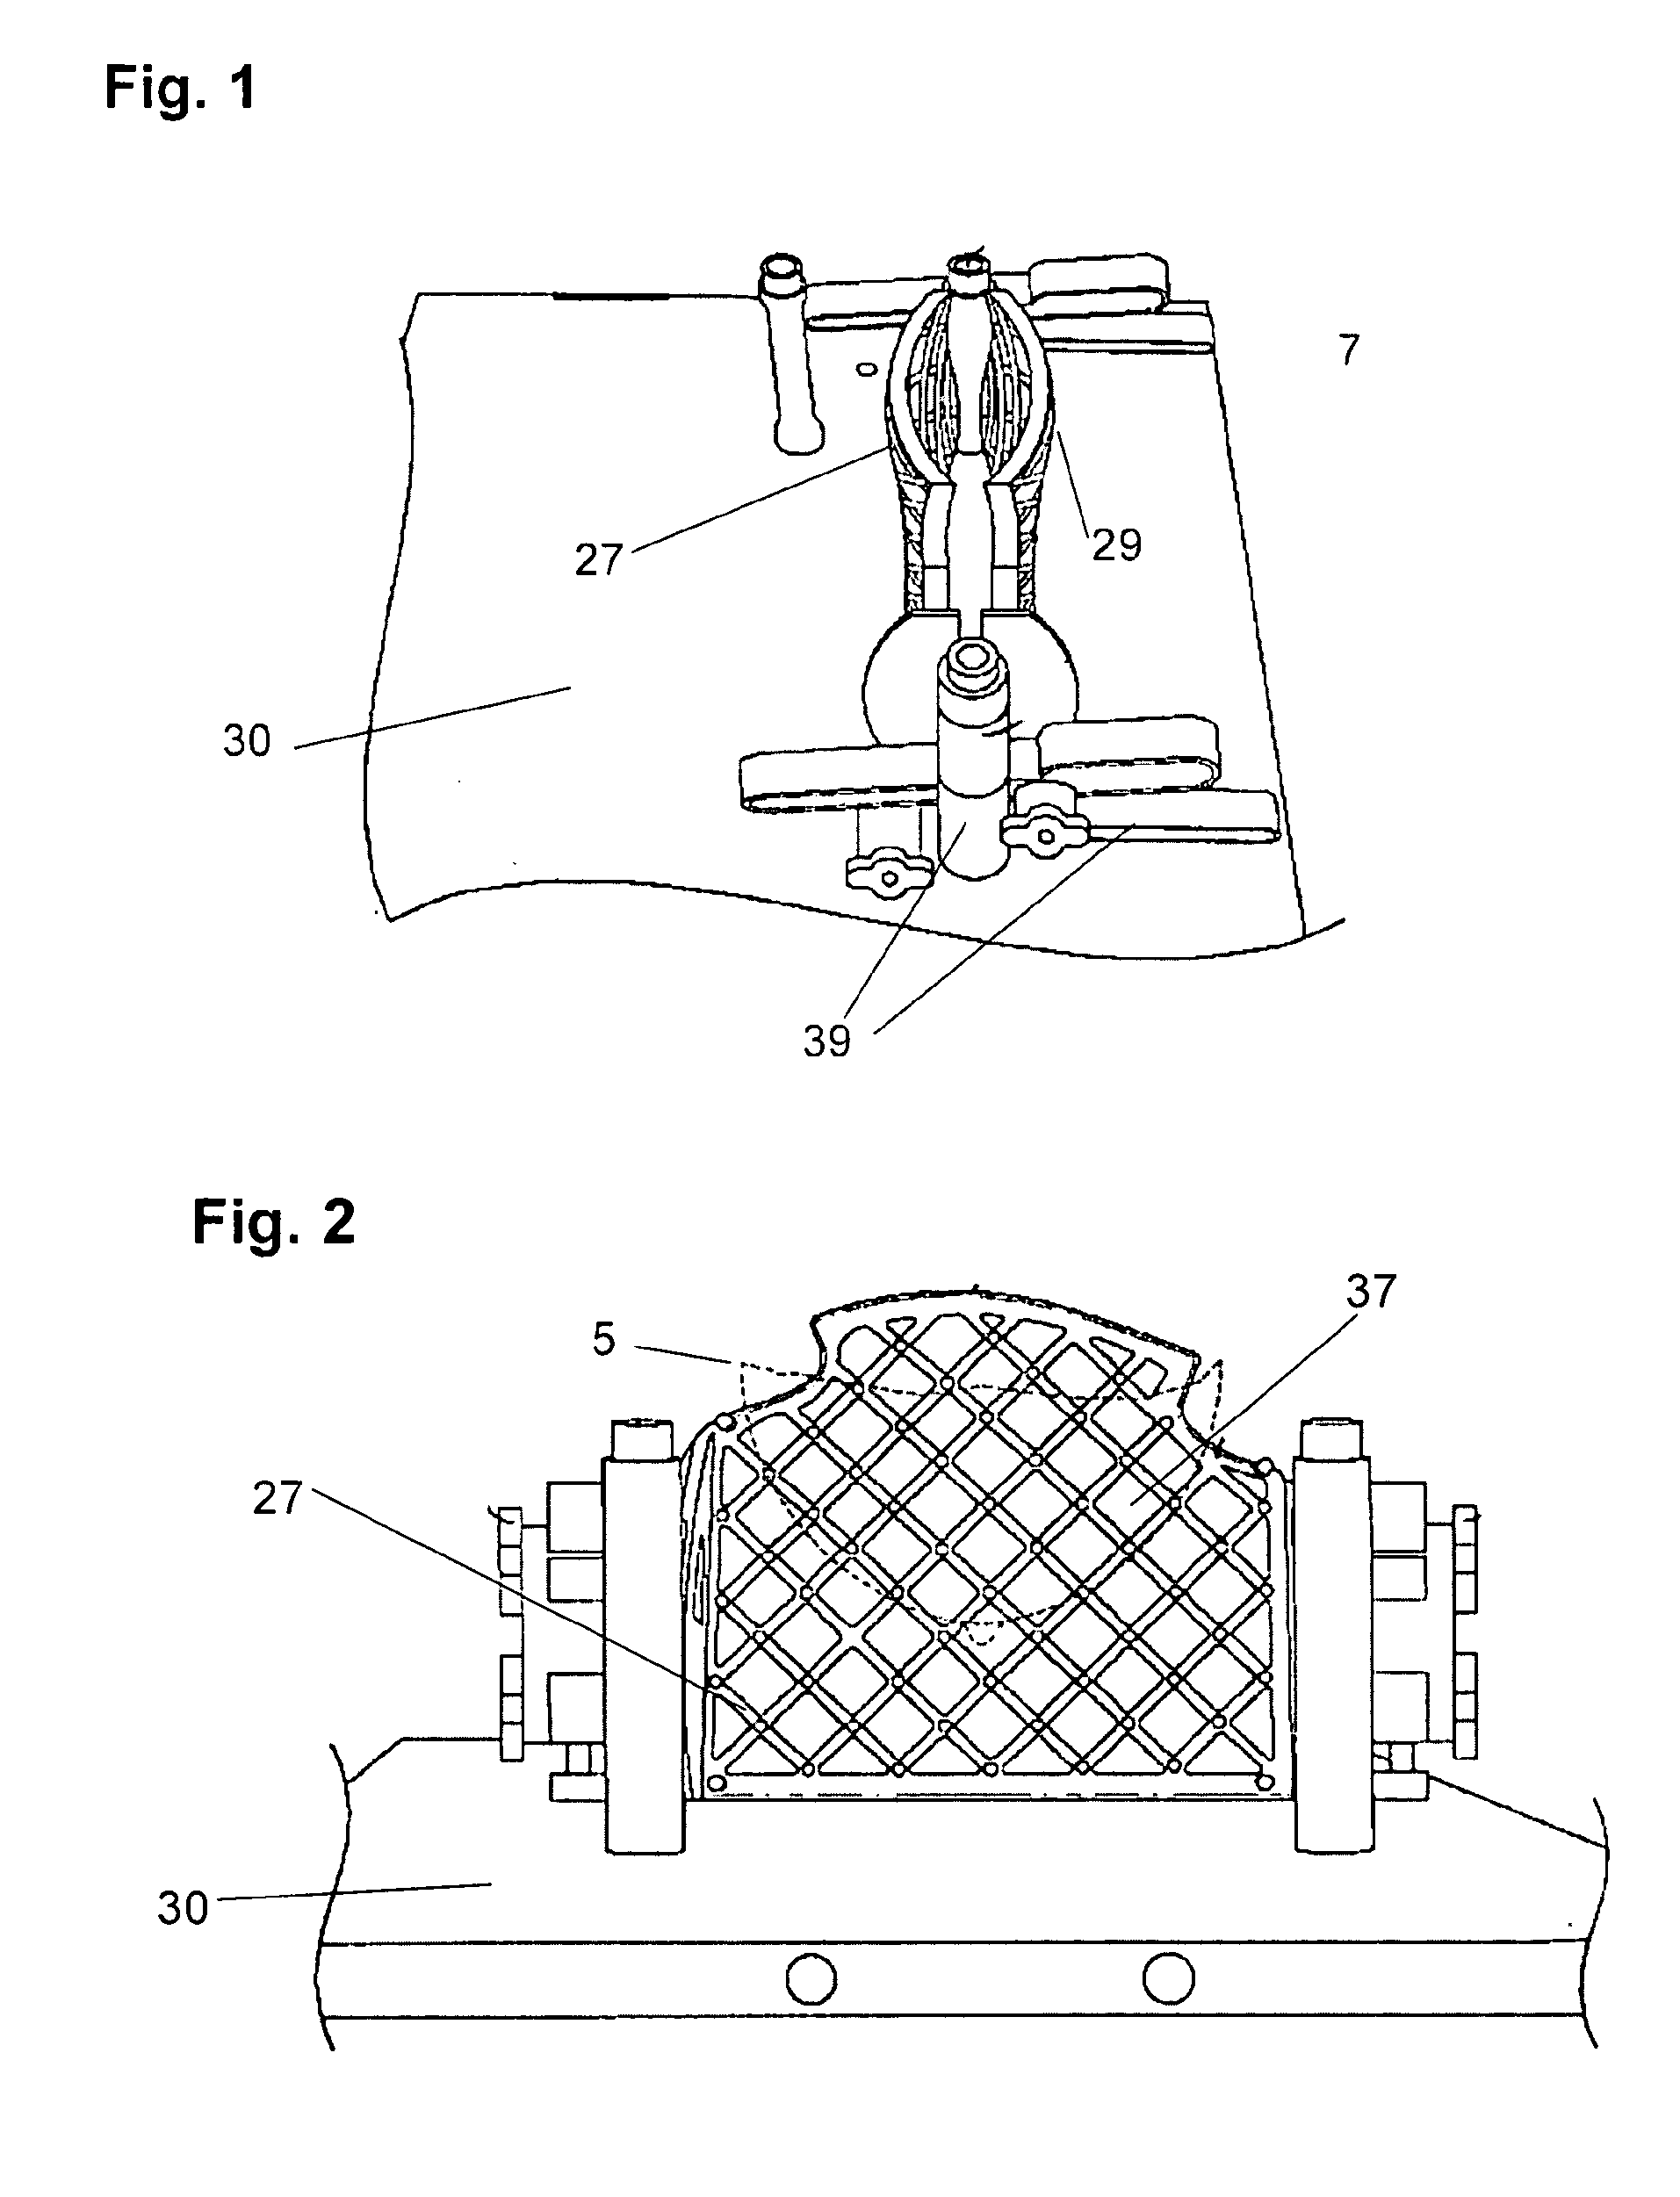 Method for mapping image reference points to facilitate biopsy using magnetic resonance imaging